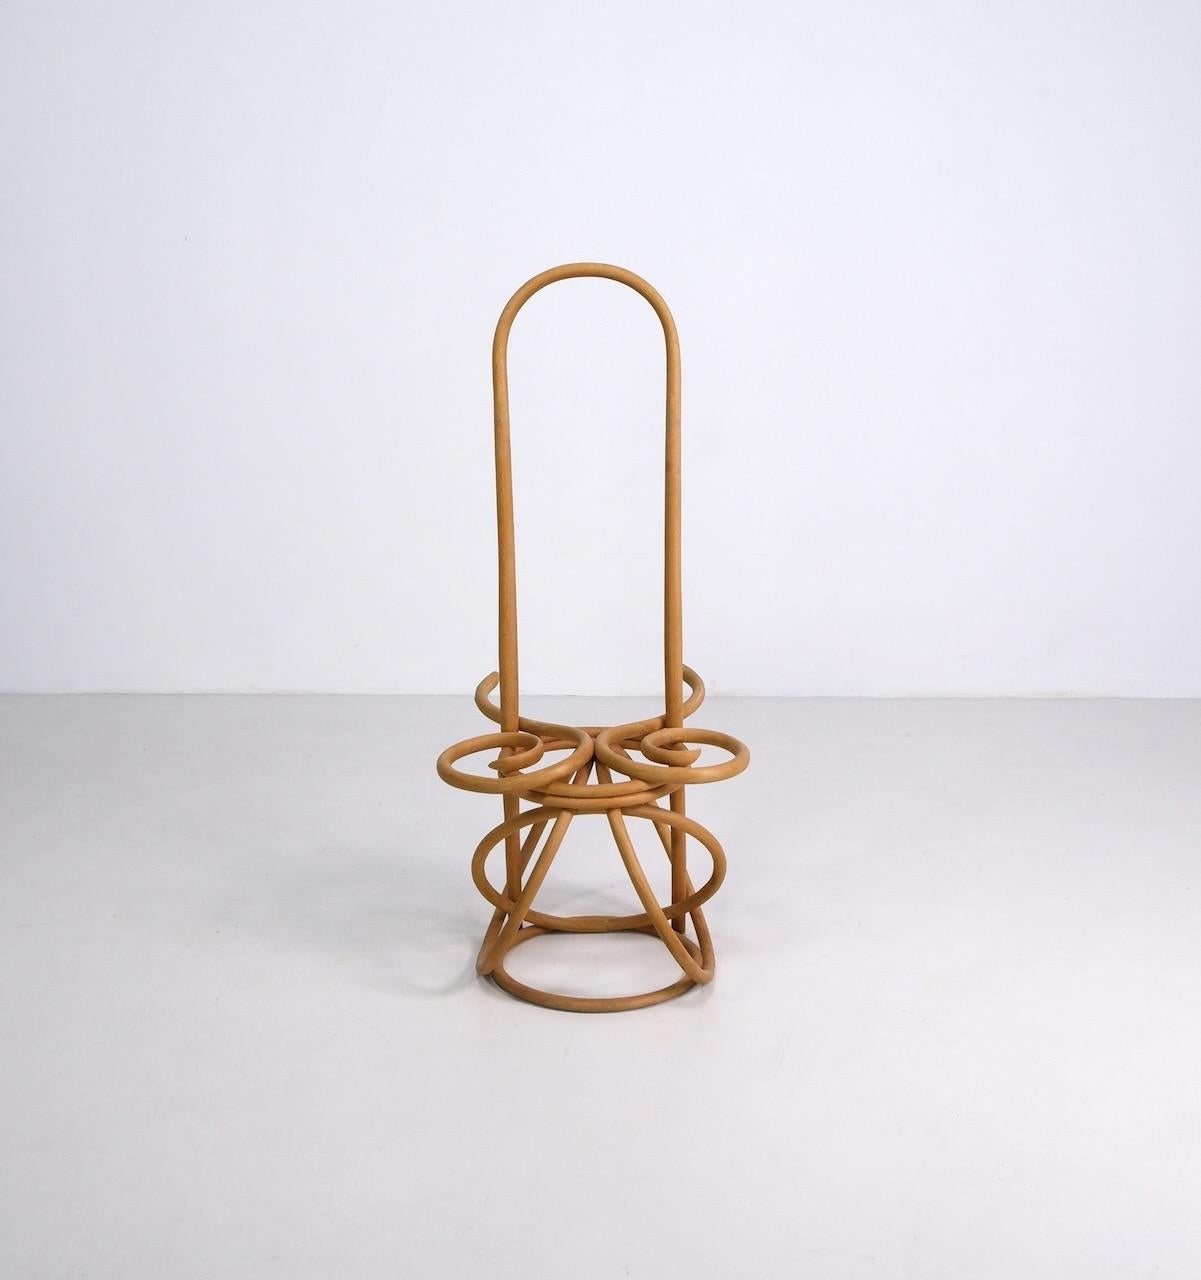 Sculptural bentwood 'Chair of the Rings' chair designed by Martin Gamper and produced by Thonet in 2008. 

Gamper was invited by Polly Dickens, creative director of the Conran Shop, to reinterpret the classic Thonet bentwood chair for the retailers